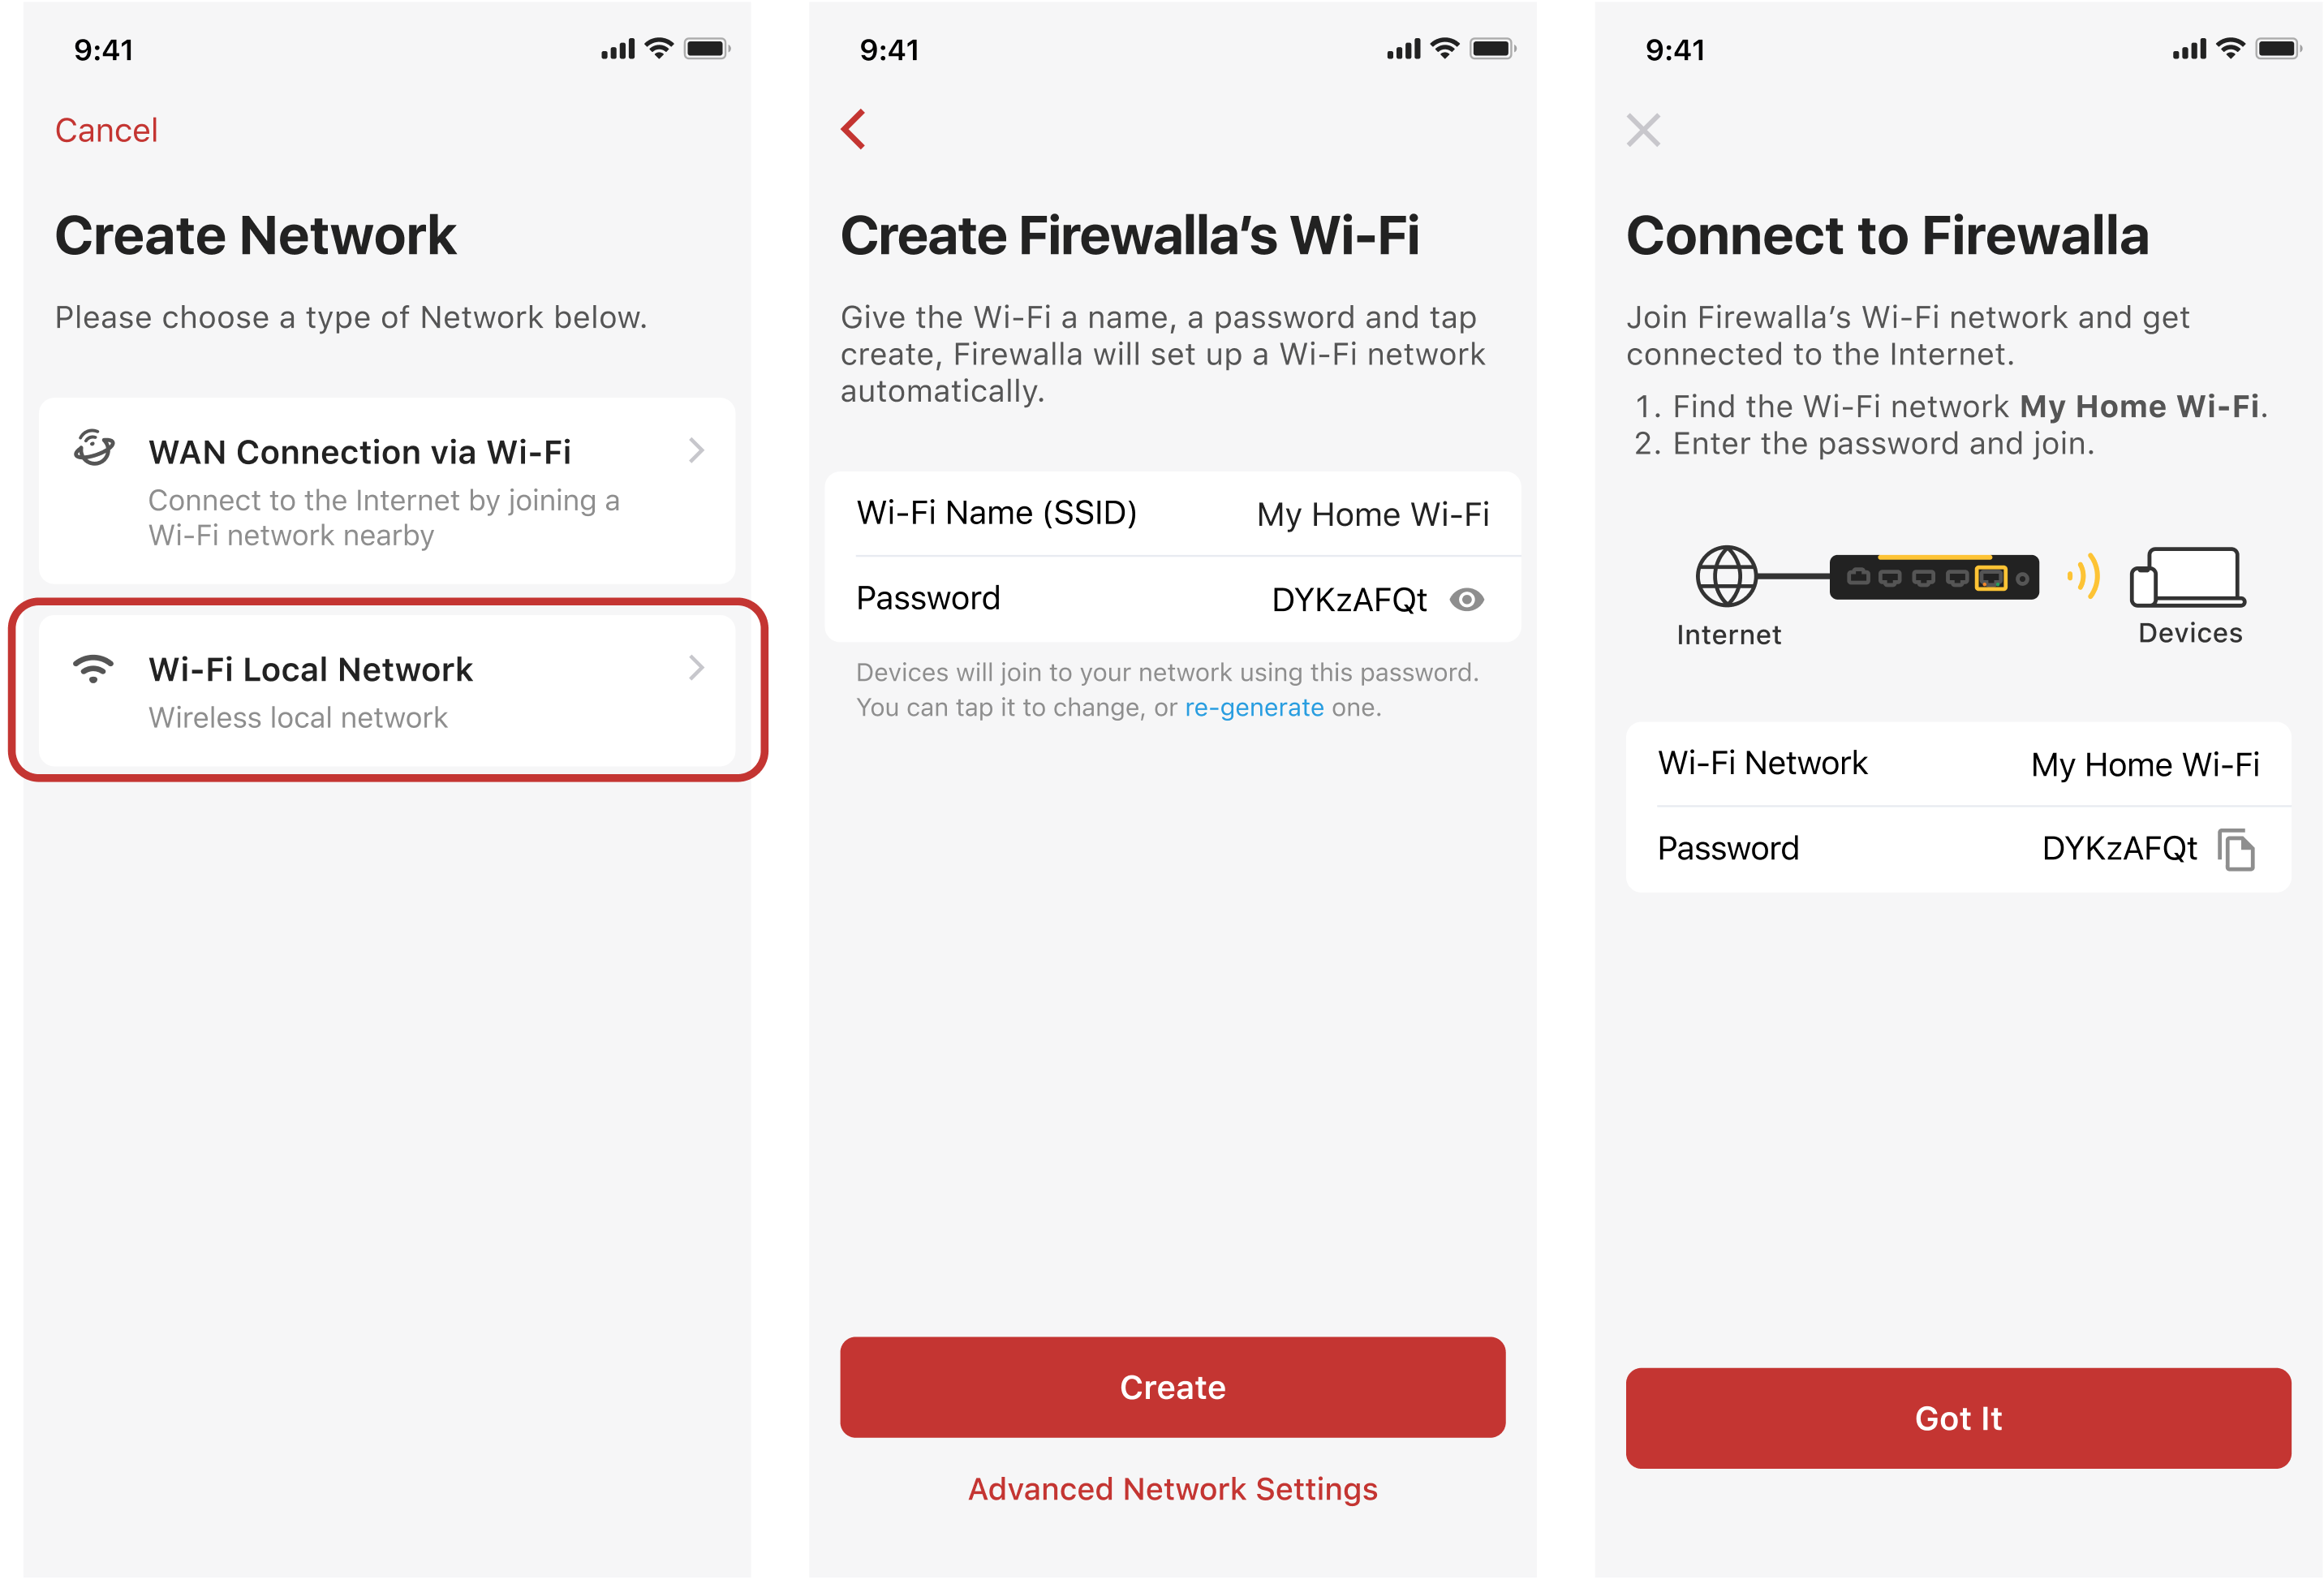 Steps showing how to create a Wi-Fi local network within the Firewalla app